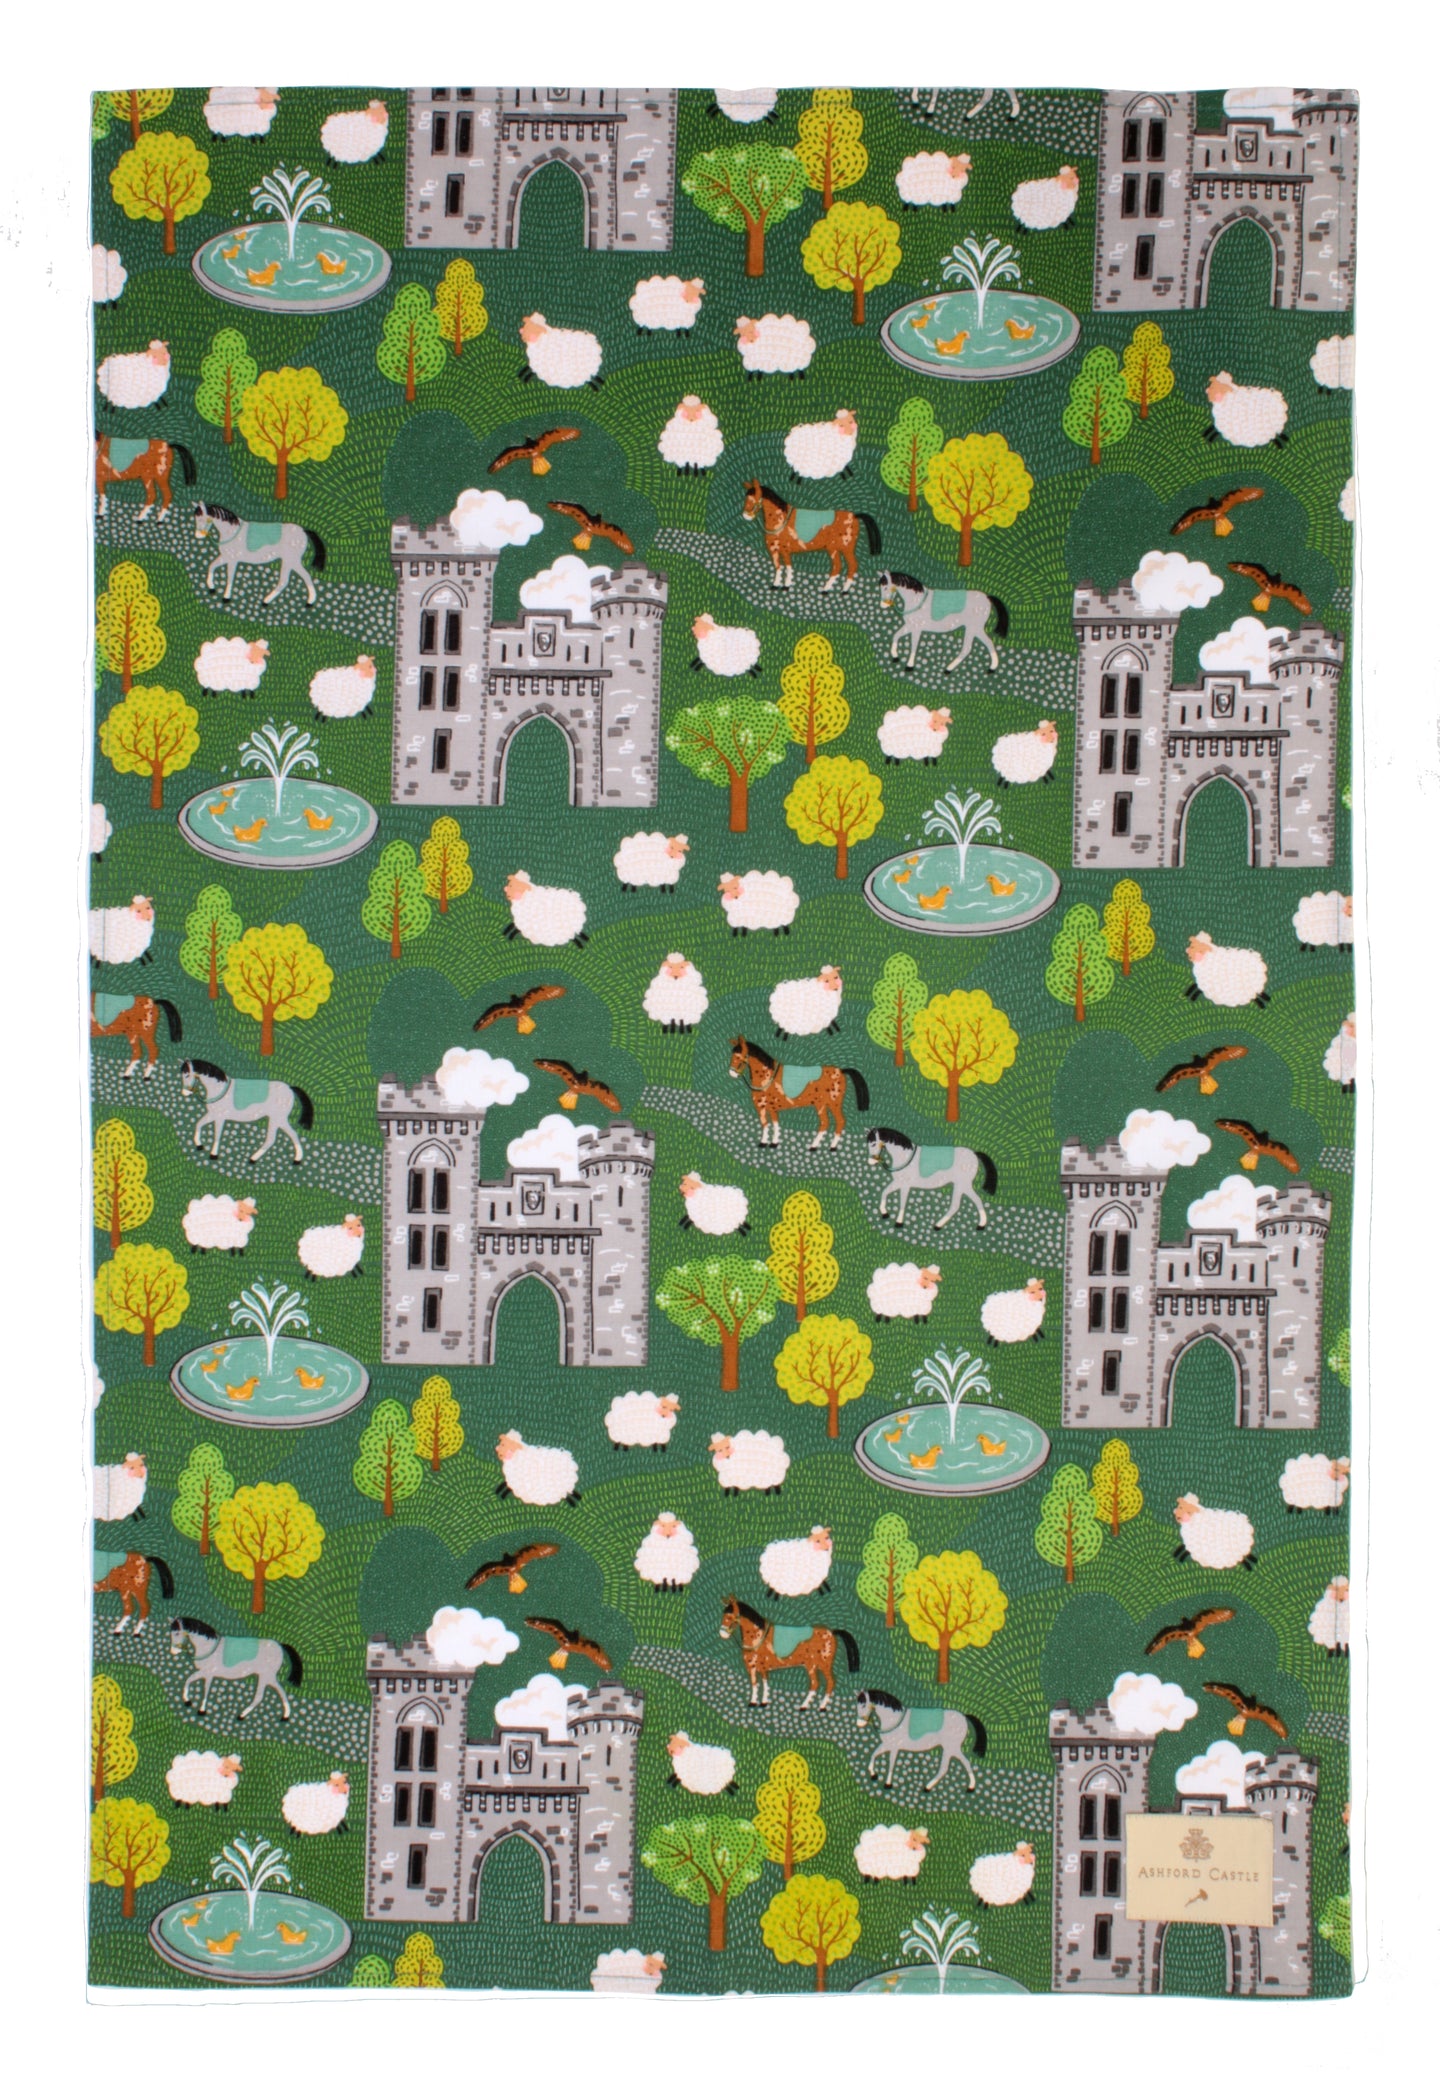 Ashford Castle Quirky Sheep - Tea Towel Mrs Tea's Boutique and Bakery